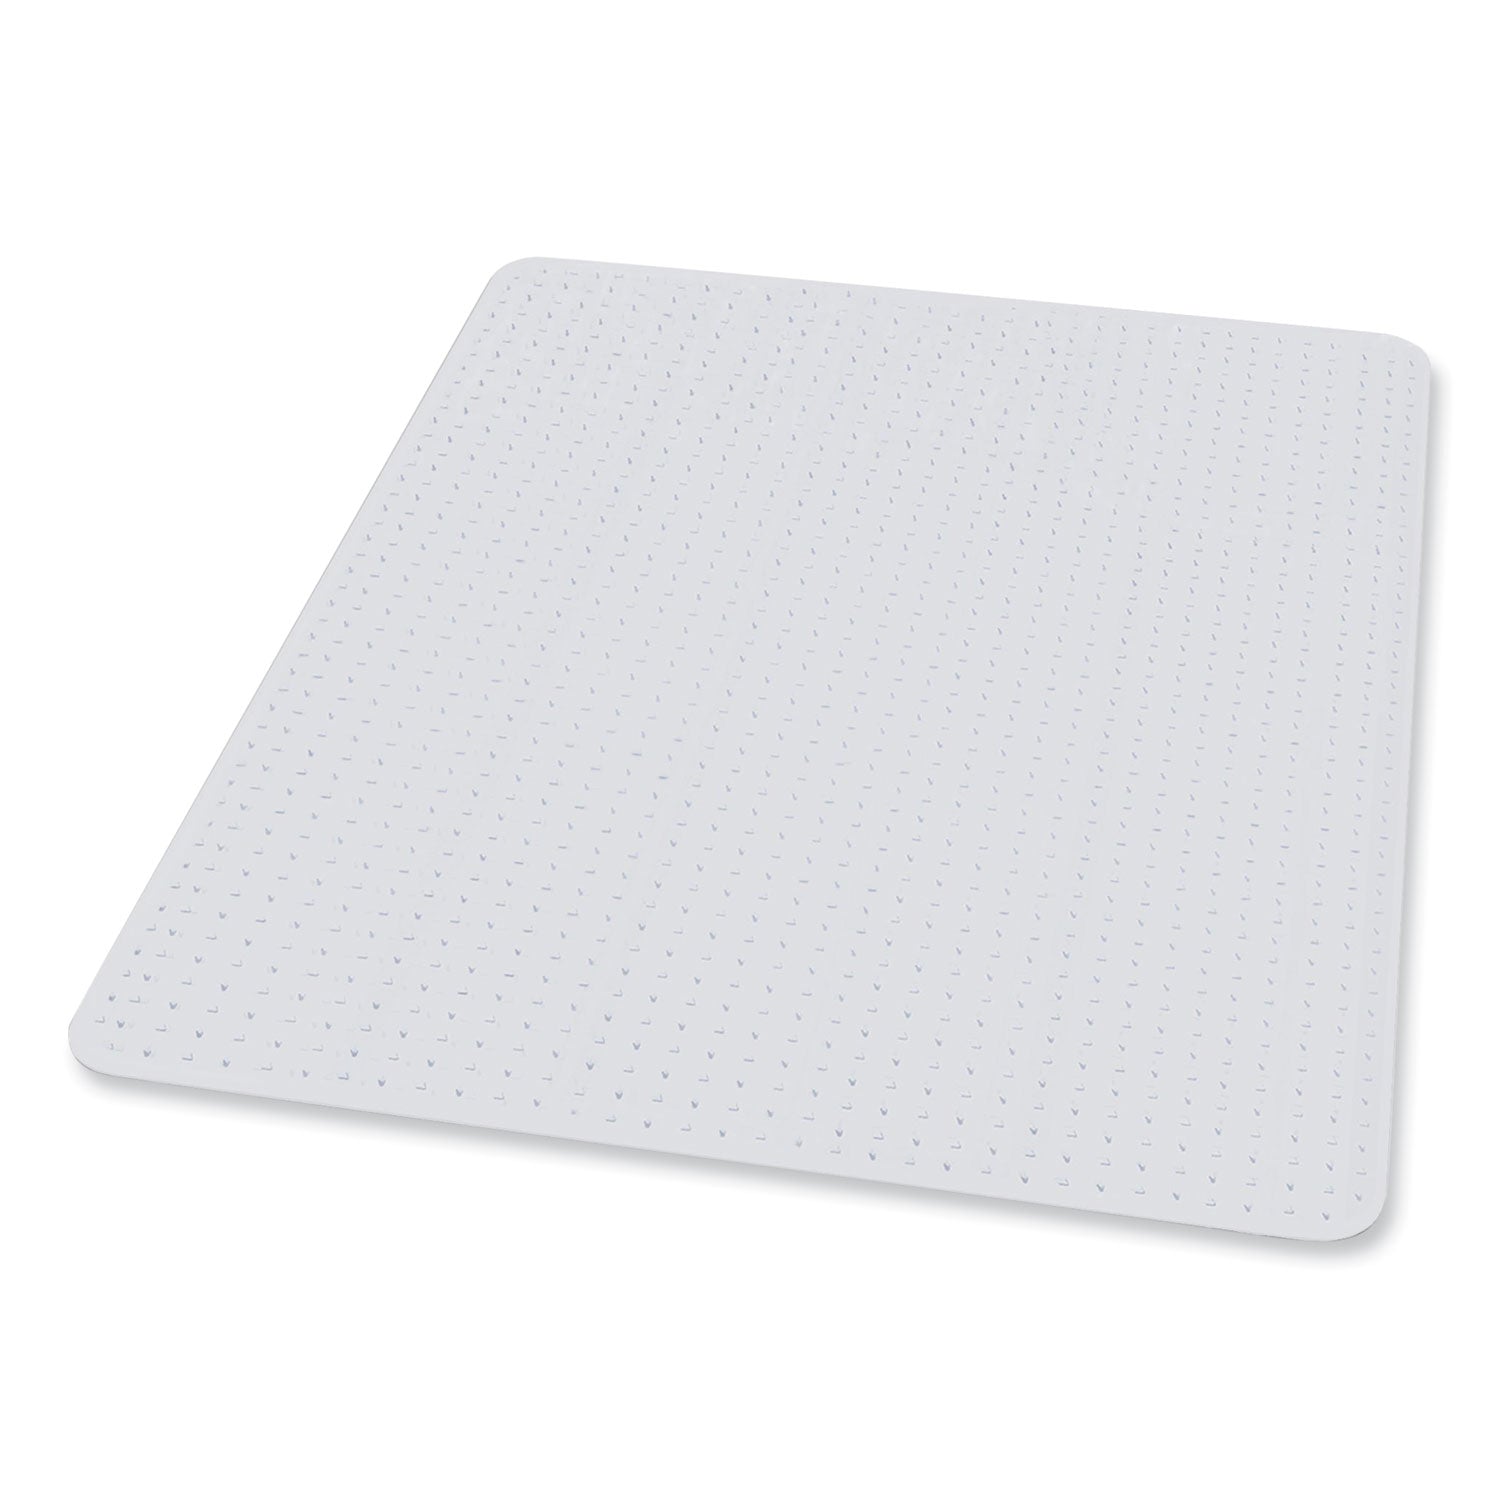 everlife-chair-mat-for-medium-pile-carpet-48-x-96-clear-ships-in-4-6-business-days_esr122581 - 1